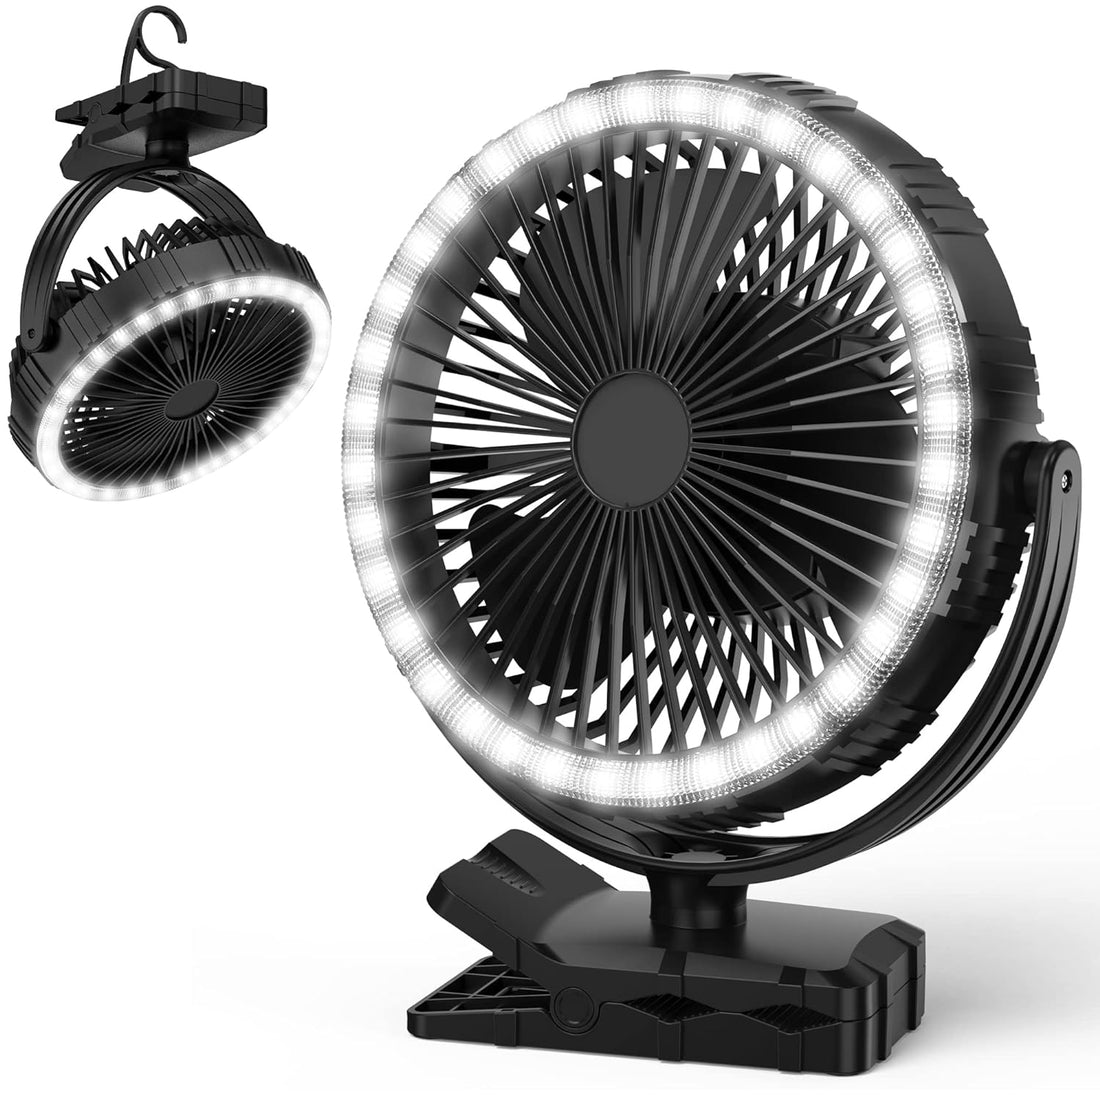 Battery Operated Fan, 10000mAh Camping Fan Battery Powered, 8'' Rechargeable Portable Desk Fan for Bedroom Office, Cordless Clip on Fan with Hook, Light for Golf Cart Outdoor Camping Tent RV Car Bed